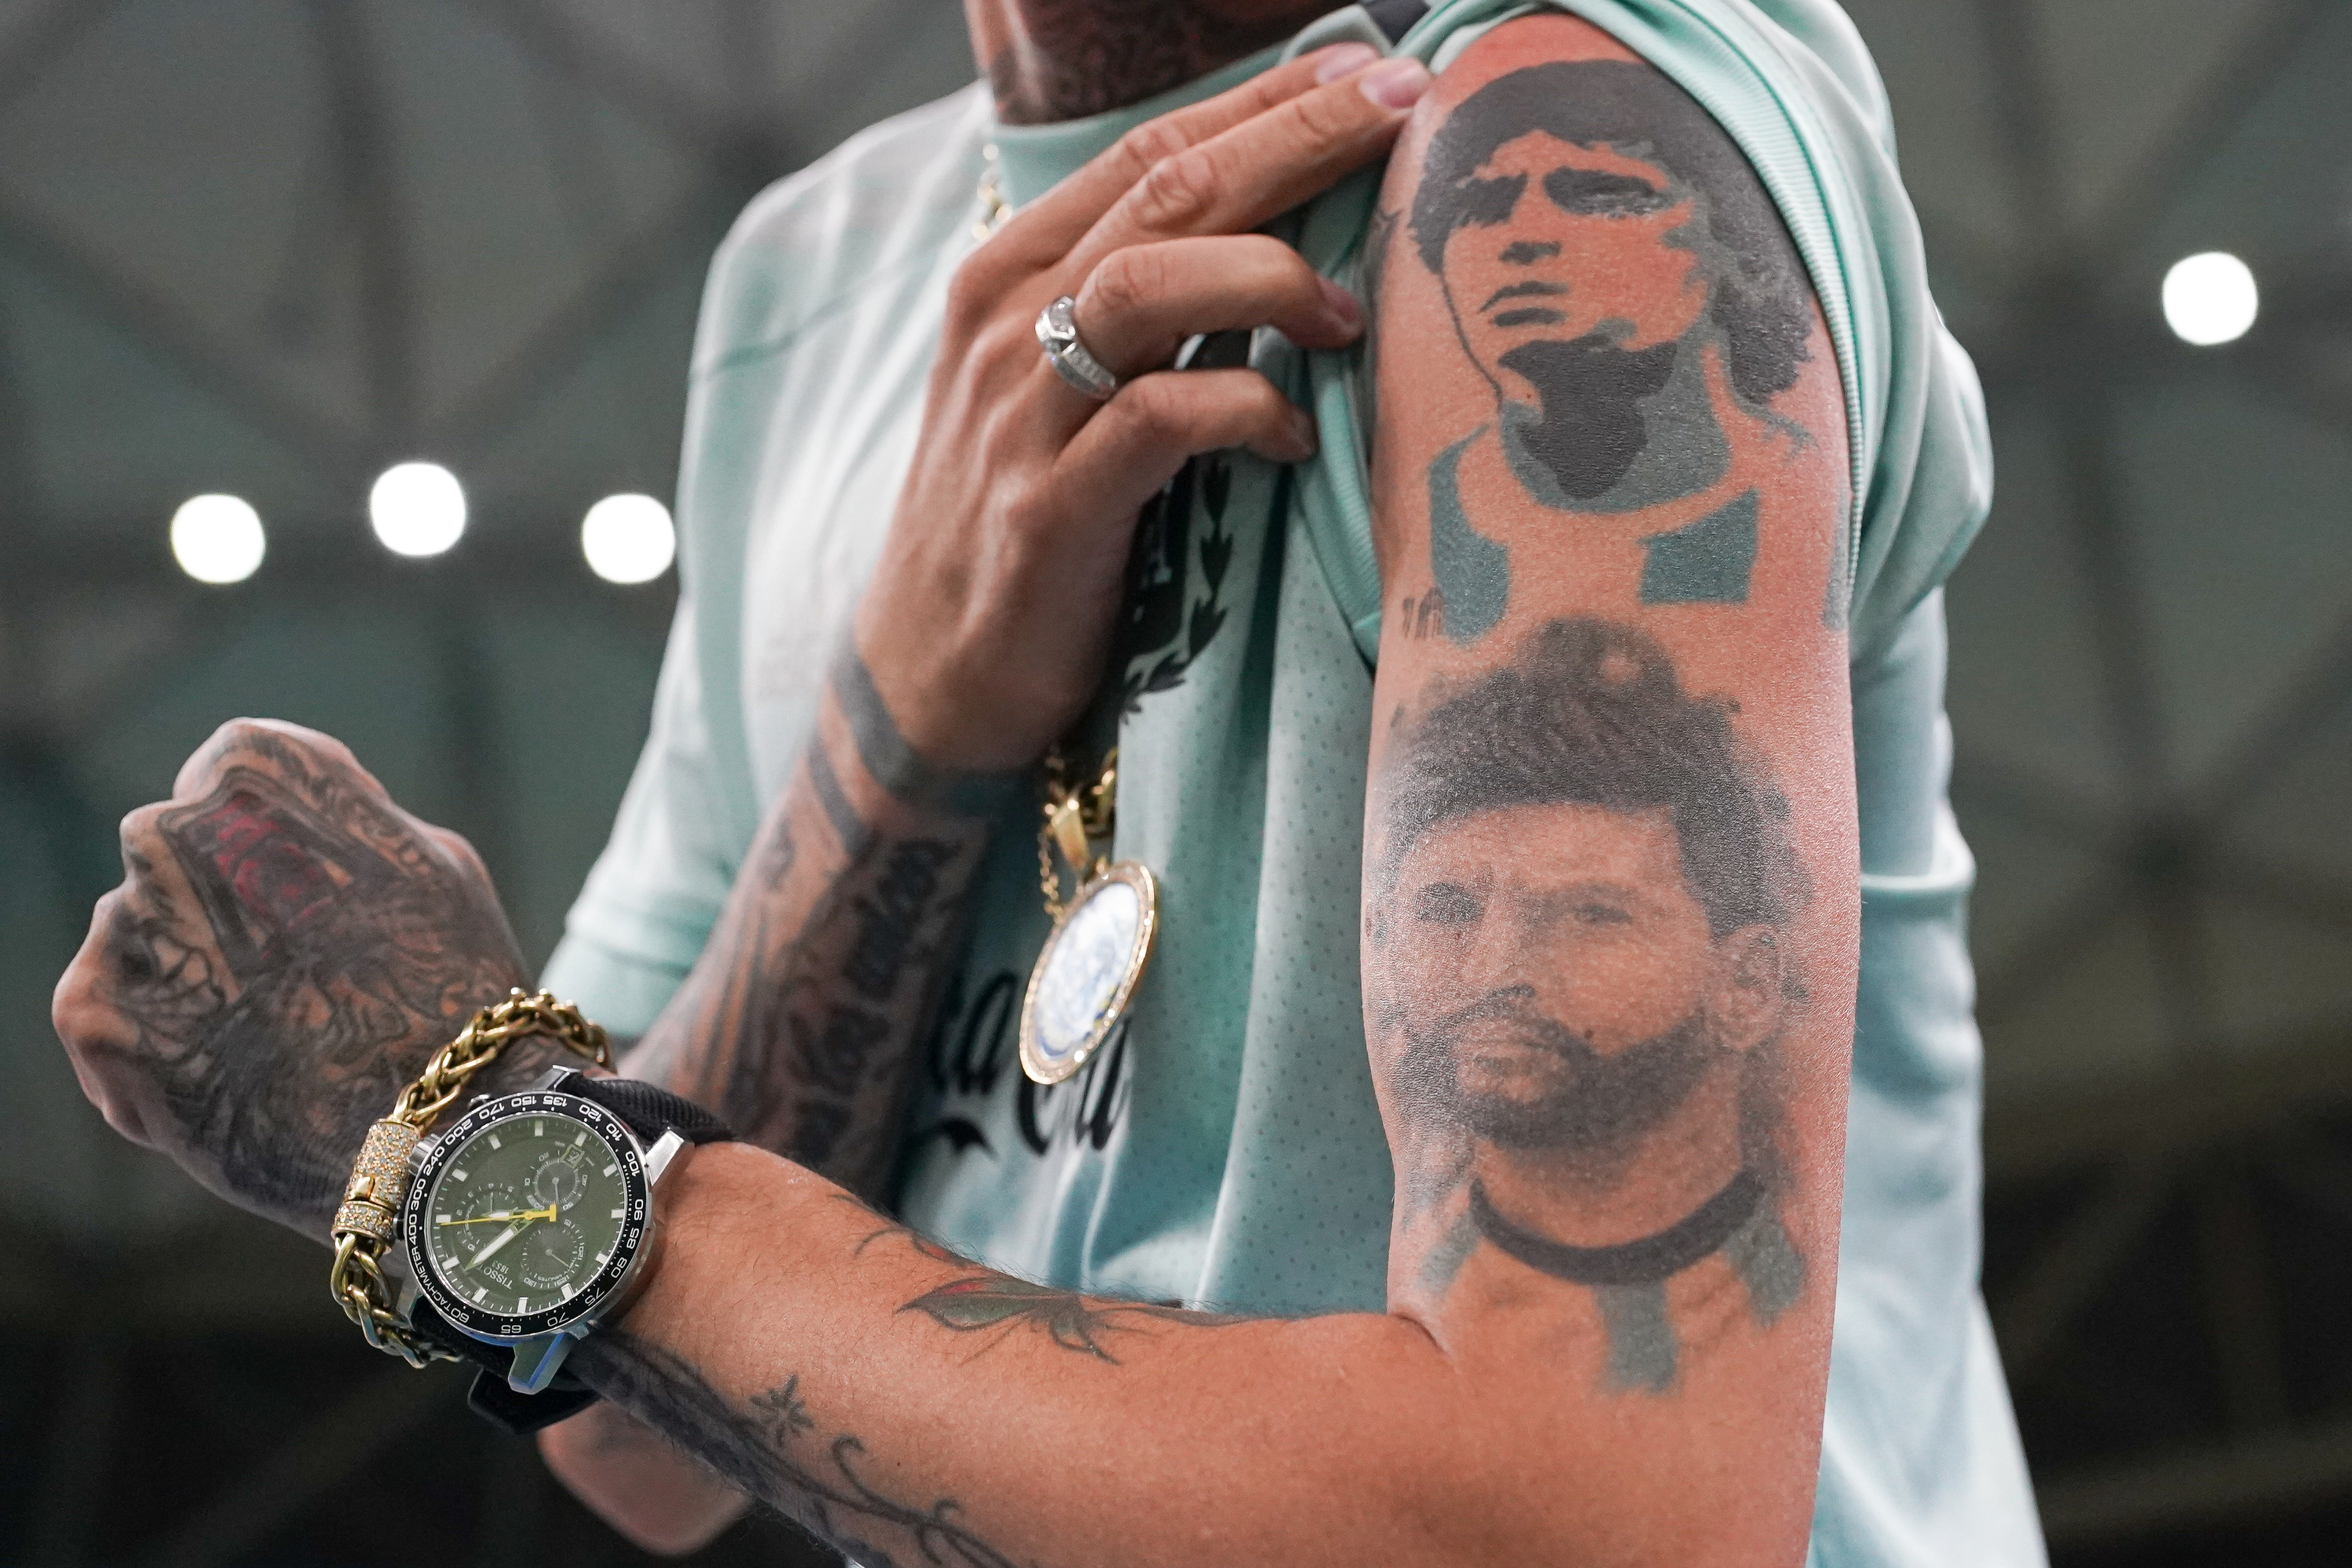 An Argentine fan shows off his Lionel Messi and Diego Maradona tattoos before the match between Argentina and Mexico at the Khalifa International Stadium in Doha, Qatar, Nov. 26.